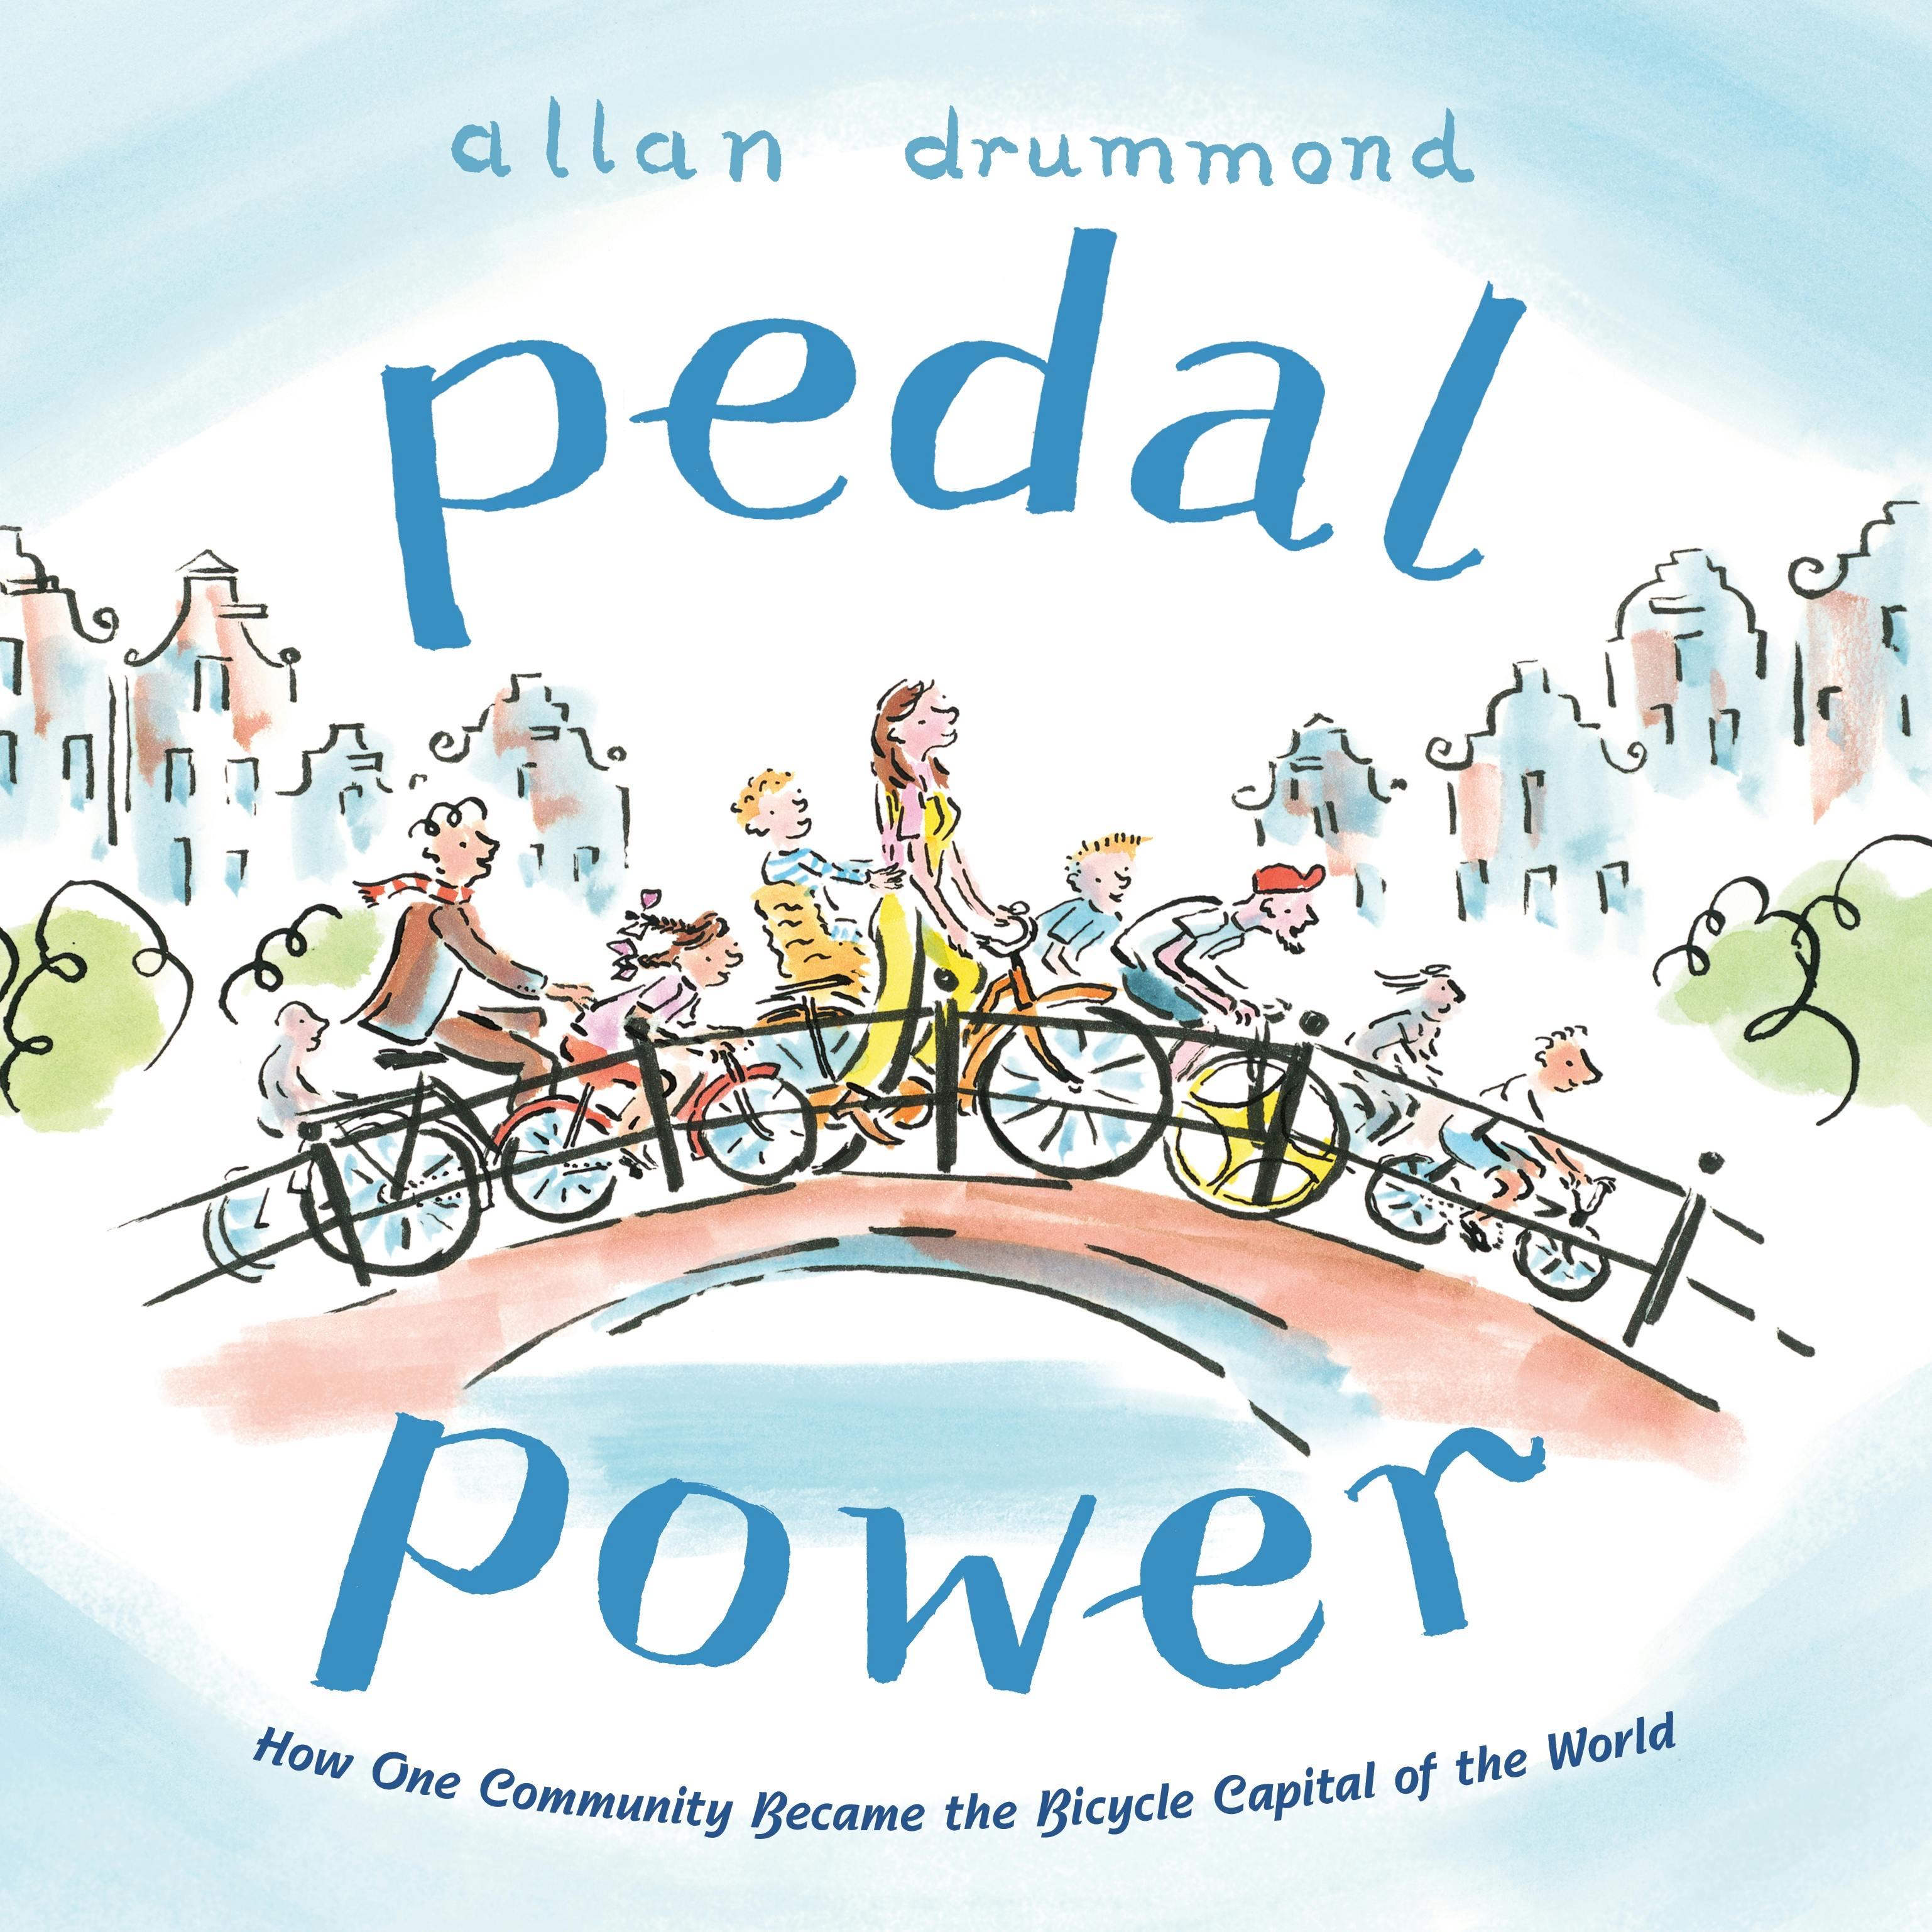 Image of Pedal Power